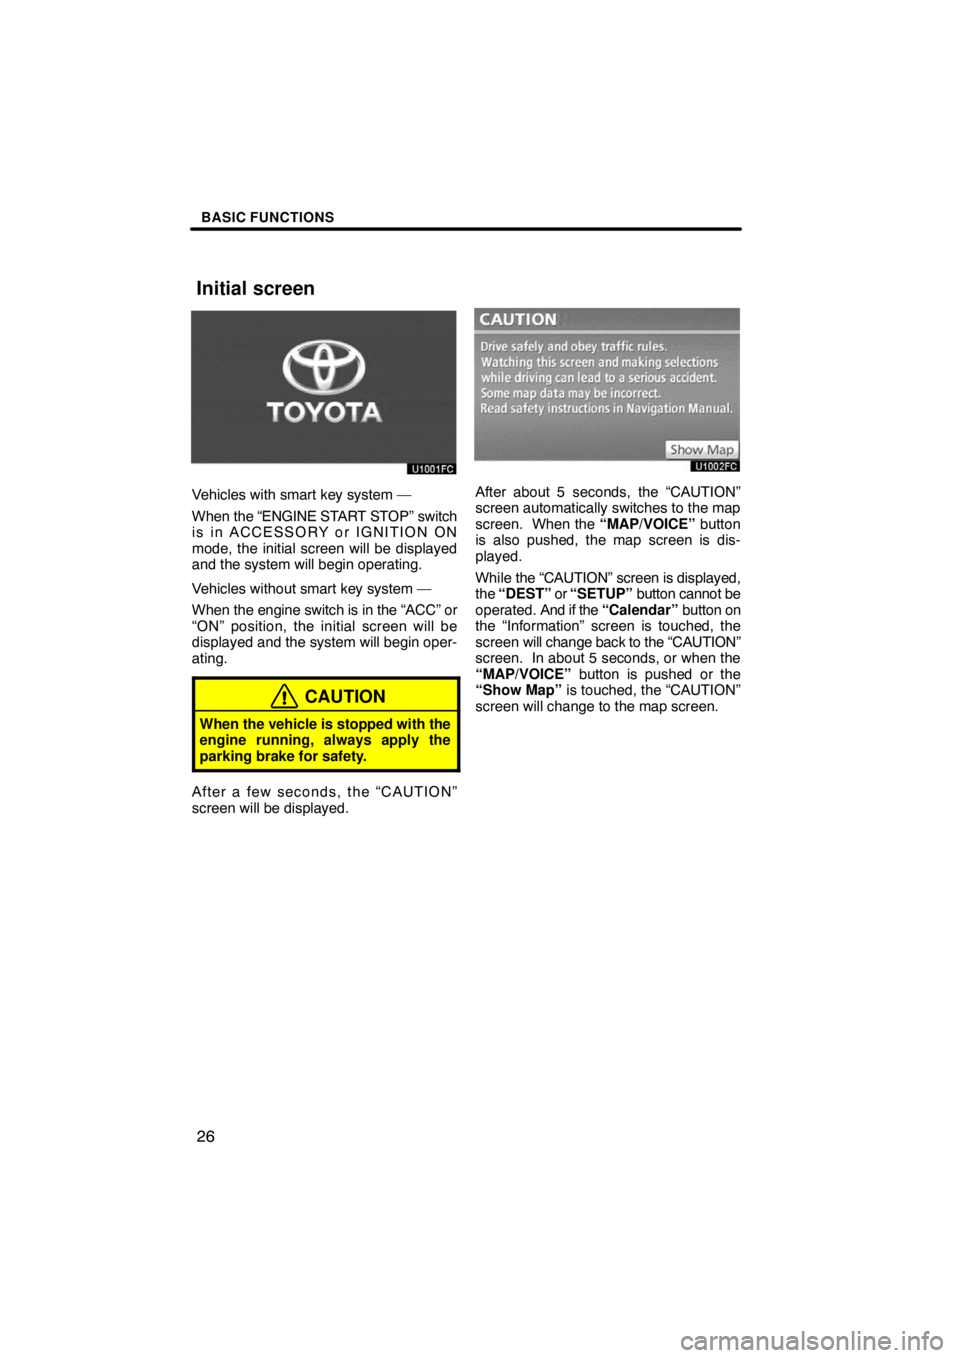 TOYOTA VENZA 2009  Accessories, Audio & Navigation (in English) BASIC FUNCTIONS
26
Vehicles with smart key system —
When the “ENGINE START STOP” switch
is in ACCESSORY or IGNITION ON
mode, the initial screen will be displayed
and the system will begin operat